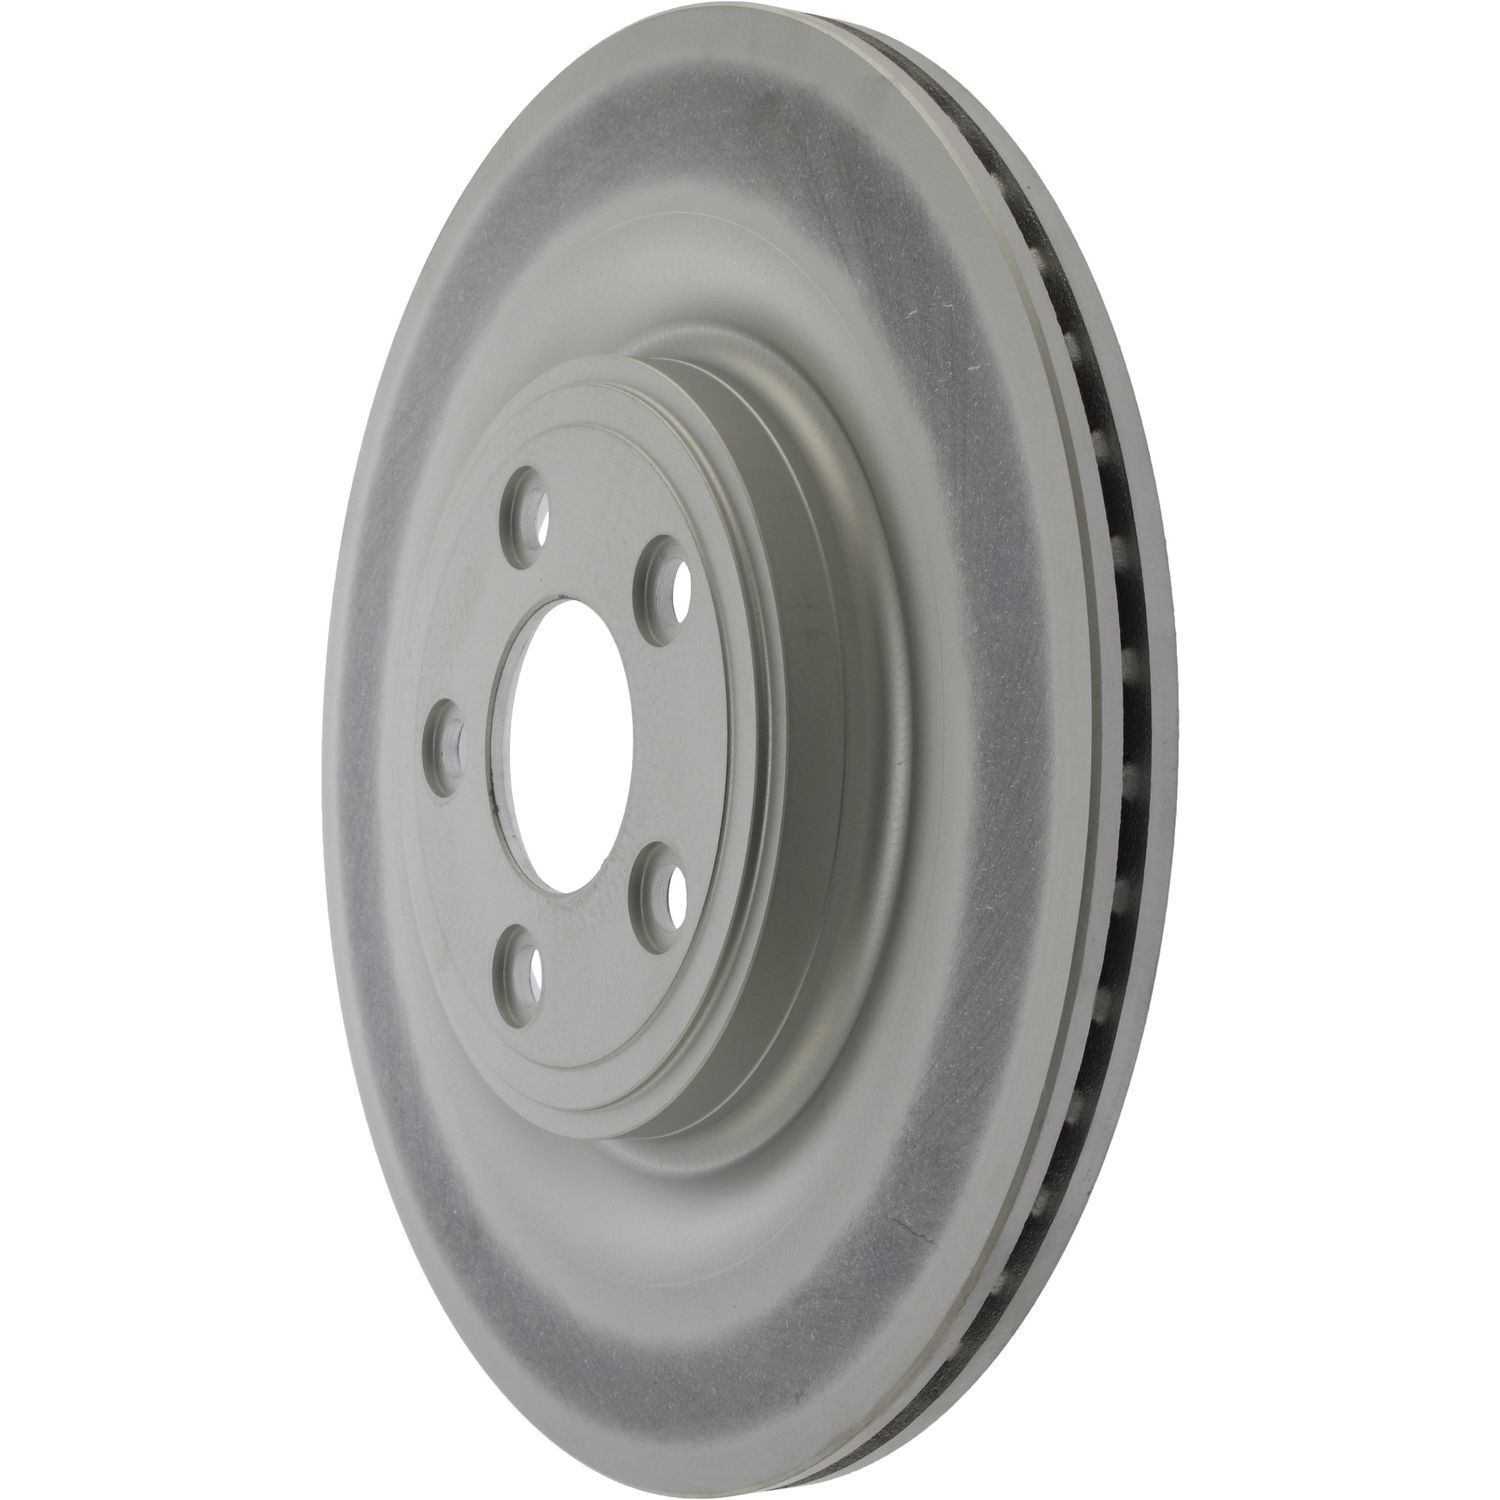 CENTRIC PARTS - Centric GCX Elemental Protection Disc Brake Rotors - Full Coating, High (Rear) - CEC 320.20022H